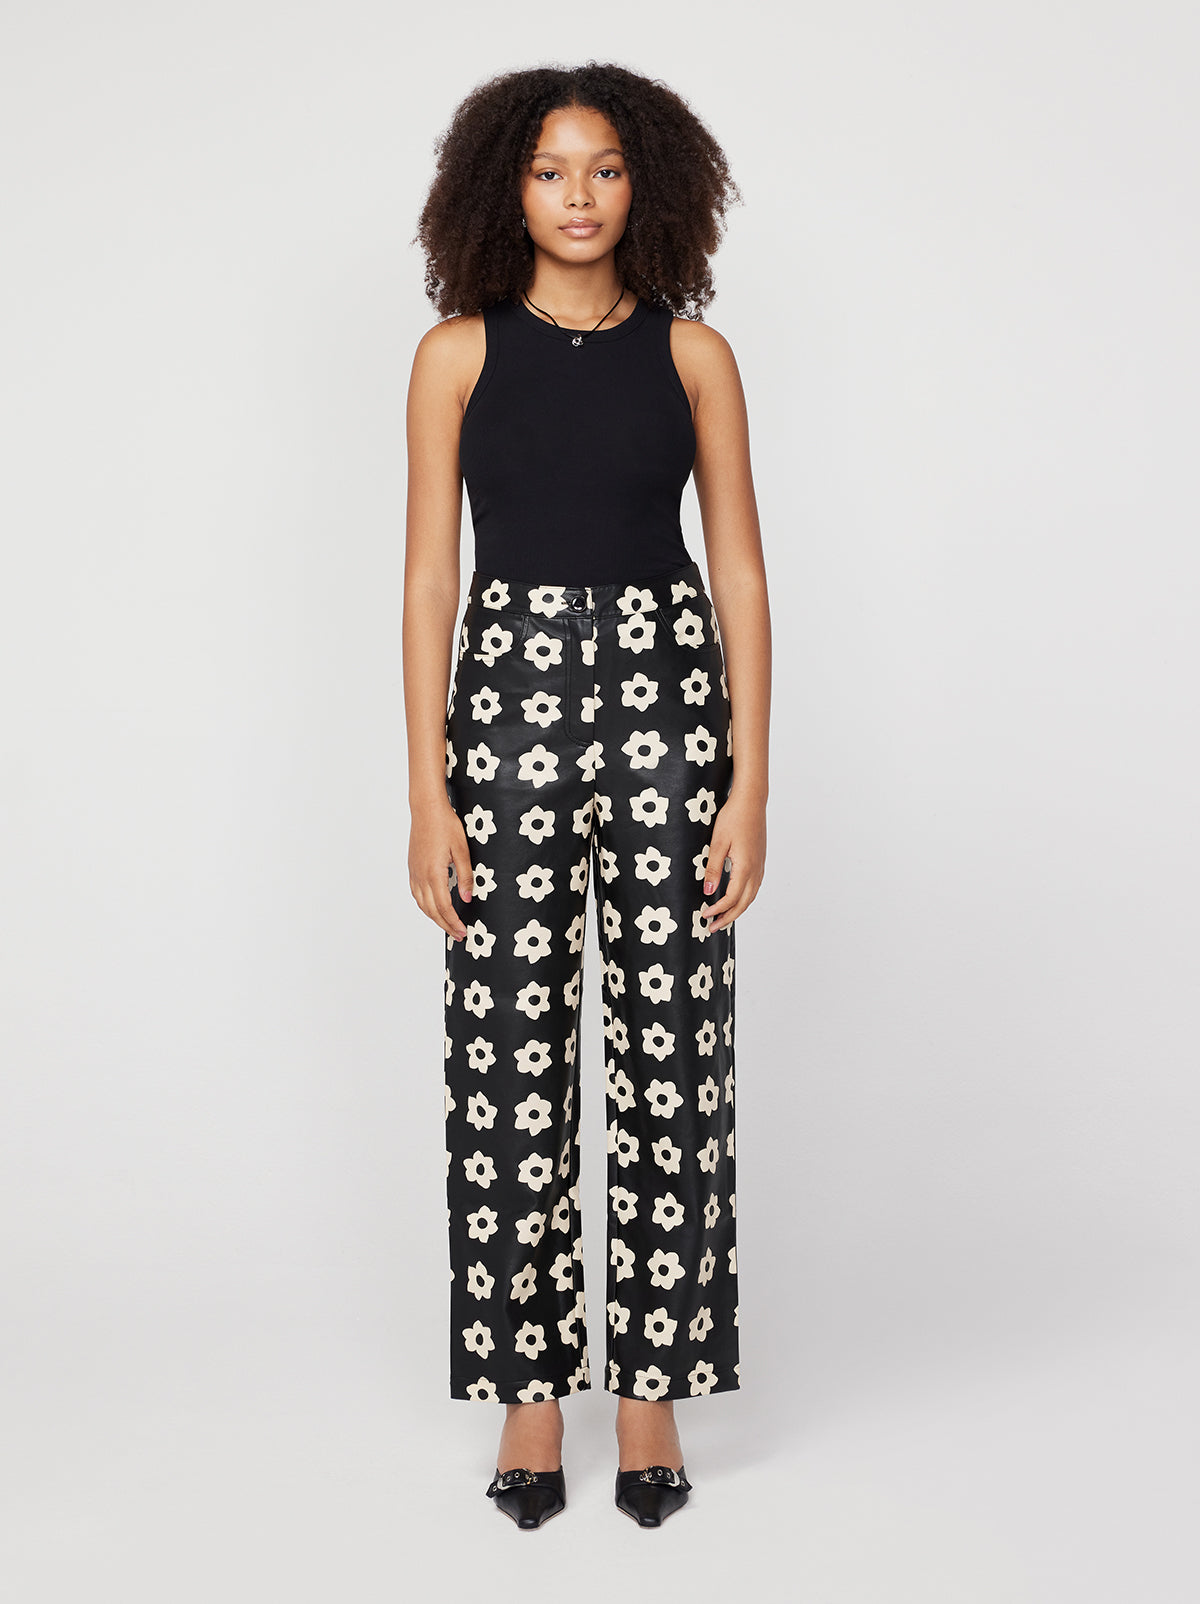 Janice Black Tiled Floral Trousers